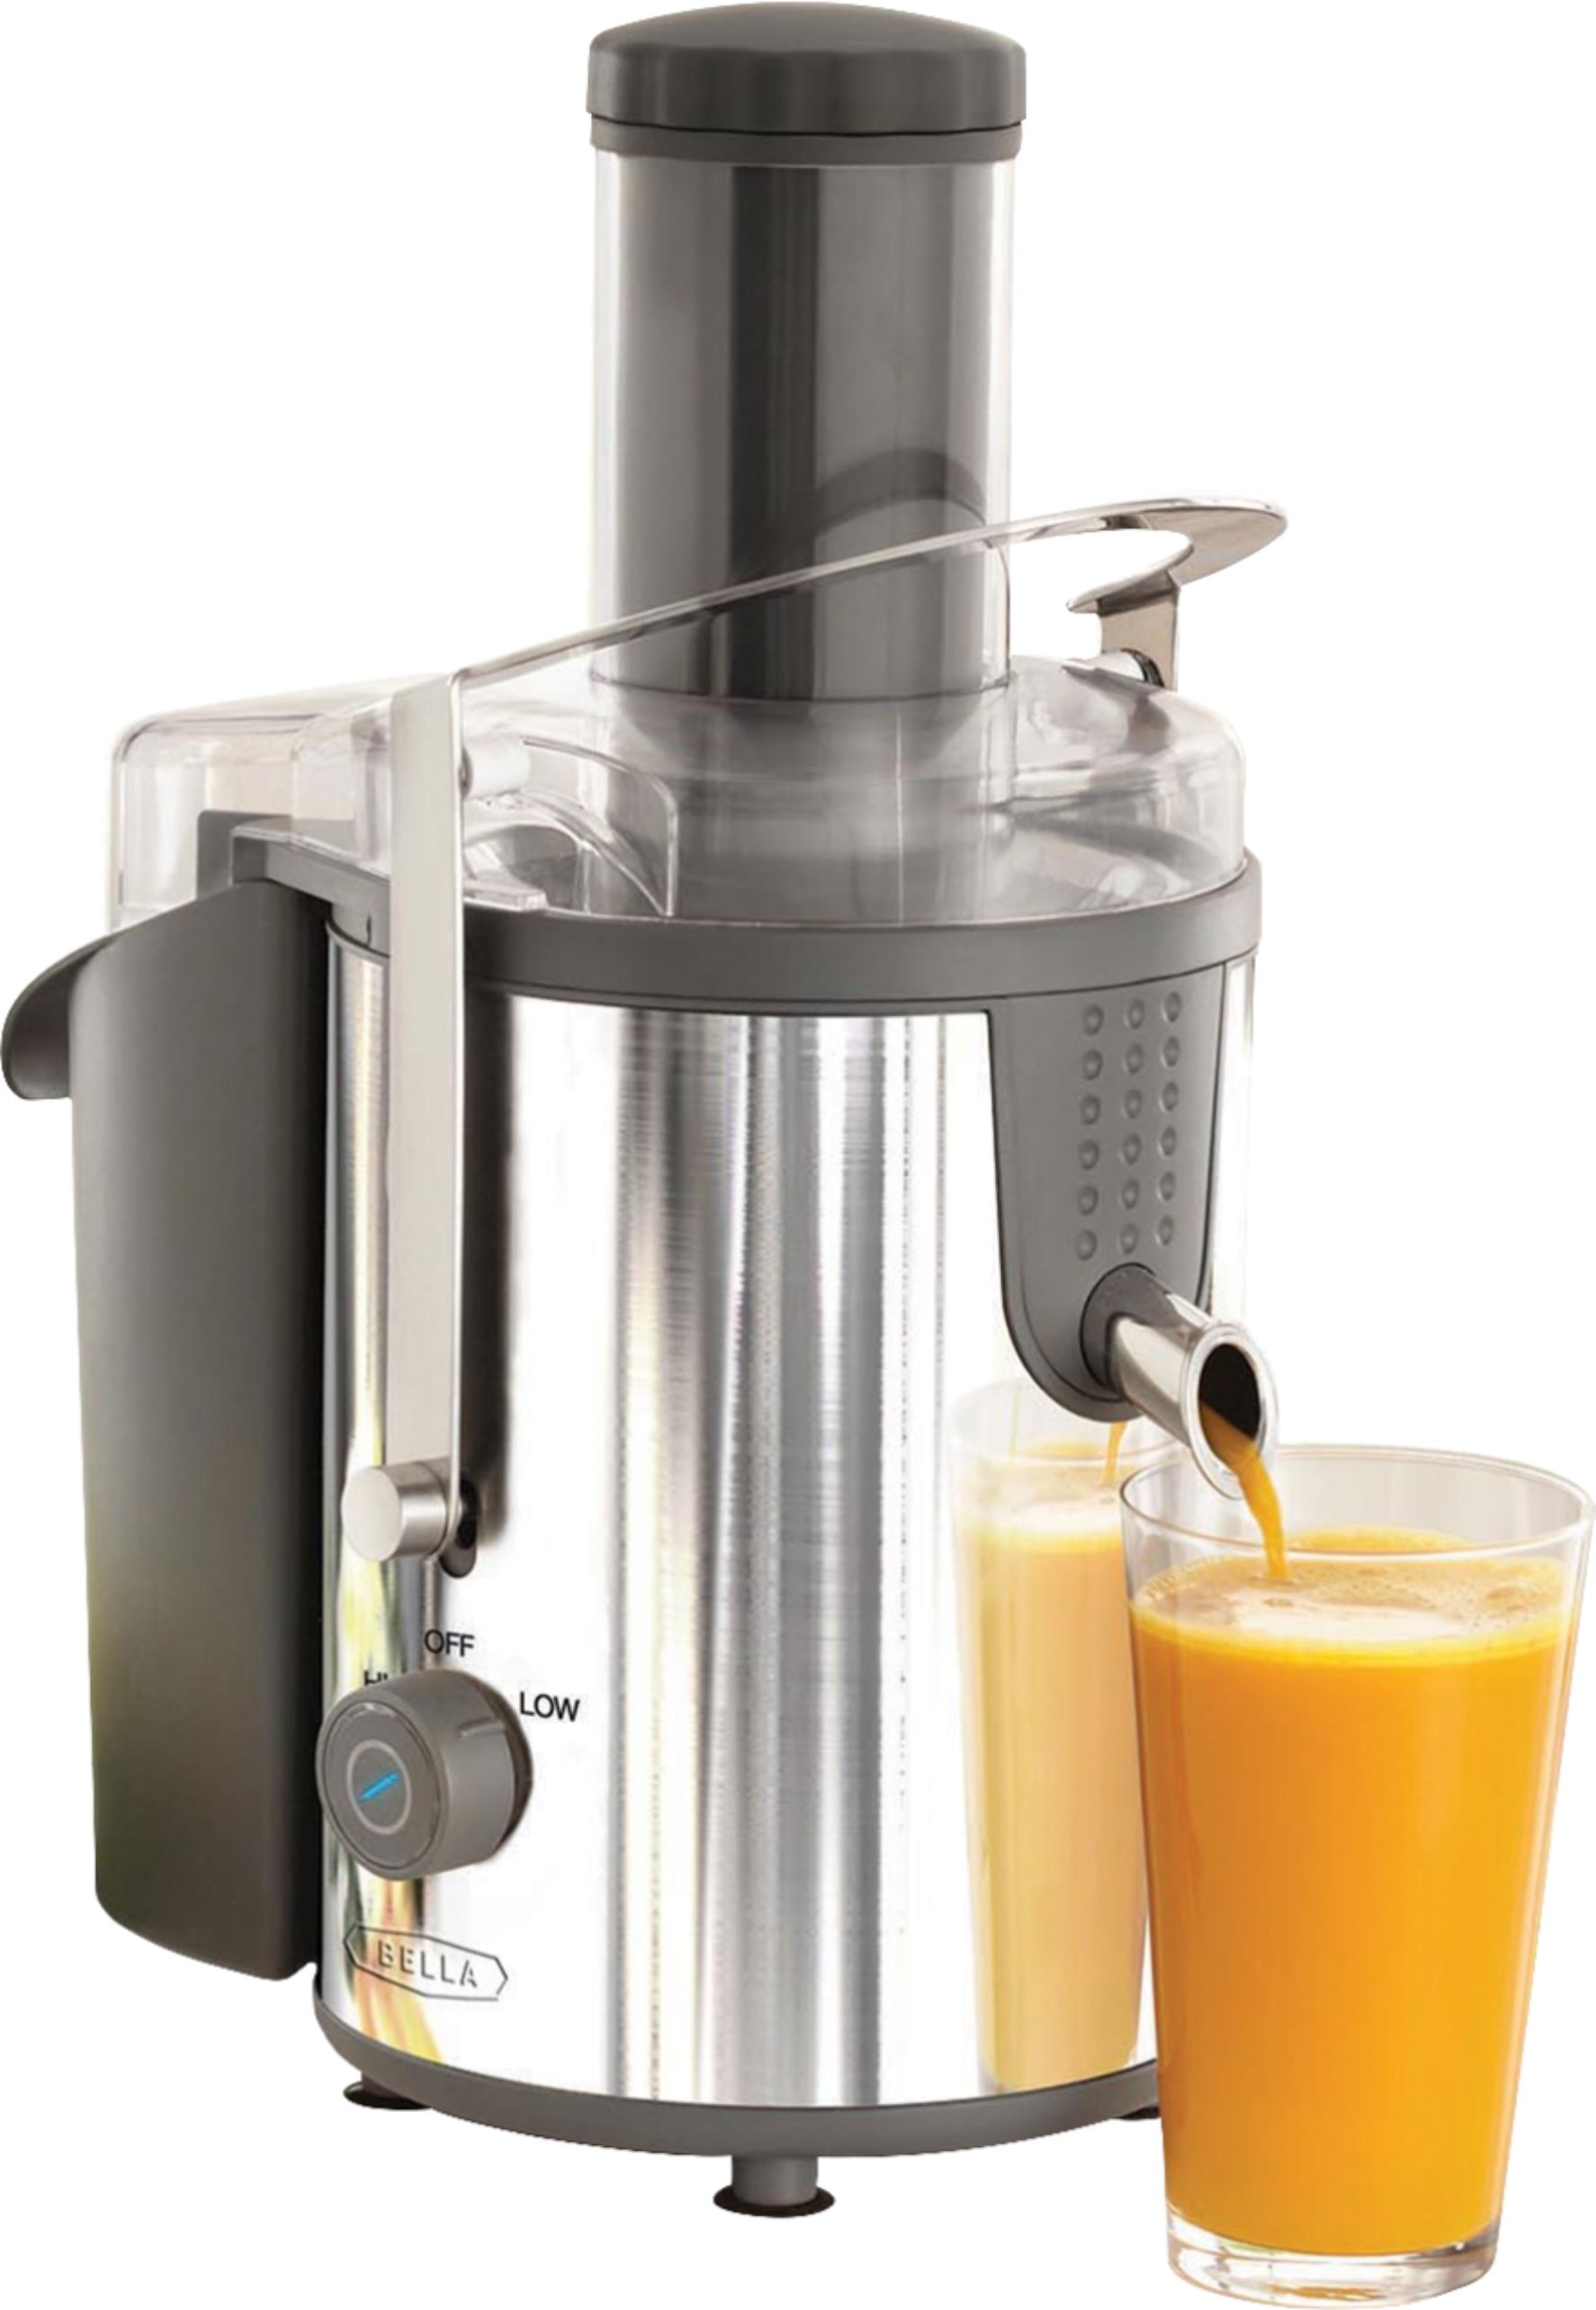 Angle View: Bella - High Power Juice Extractor - Black